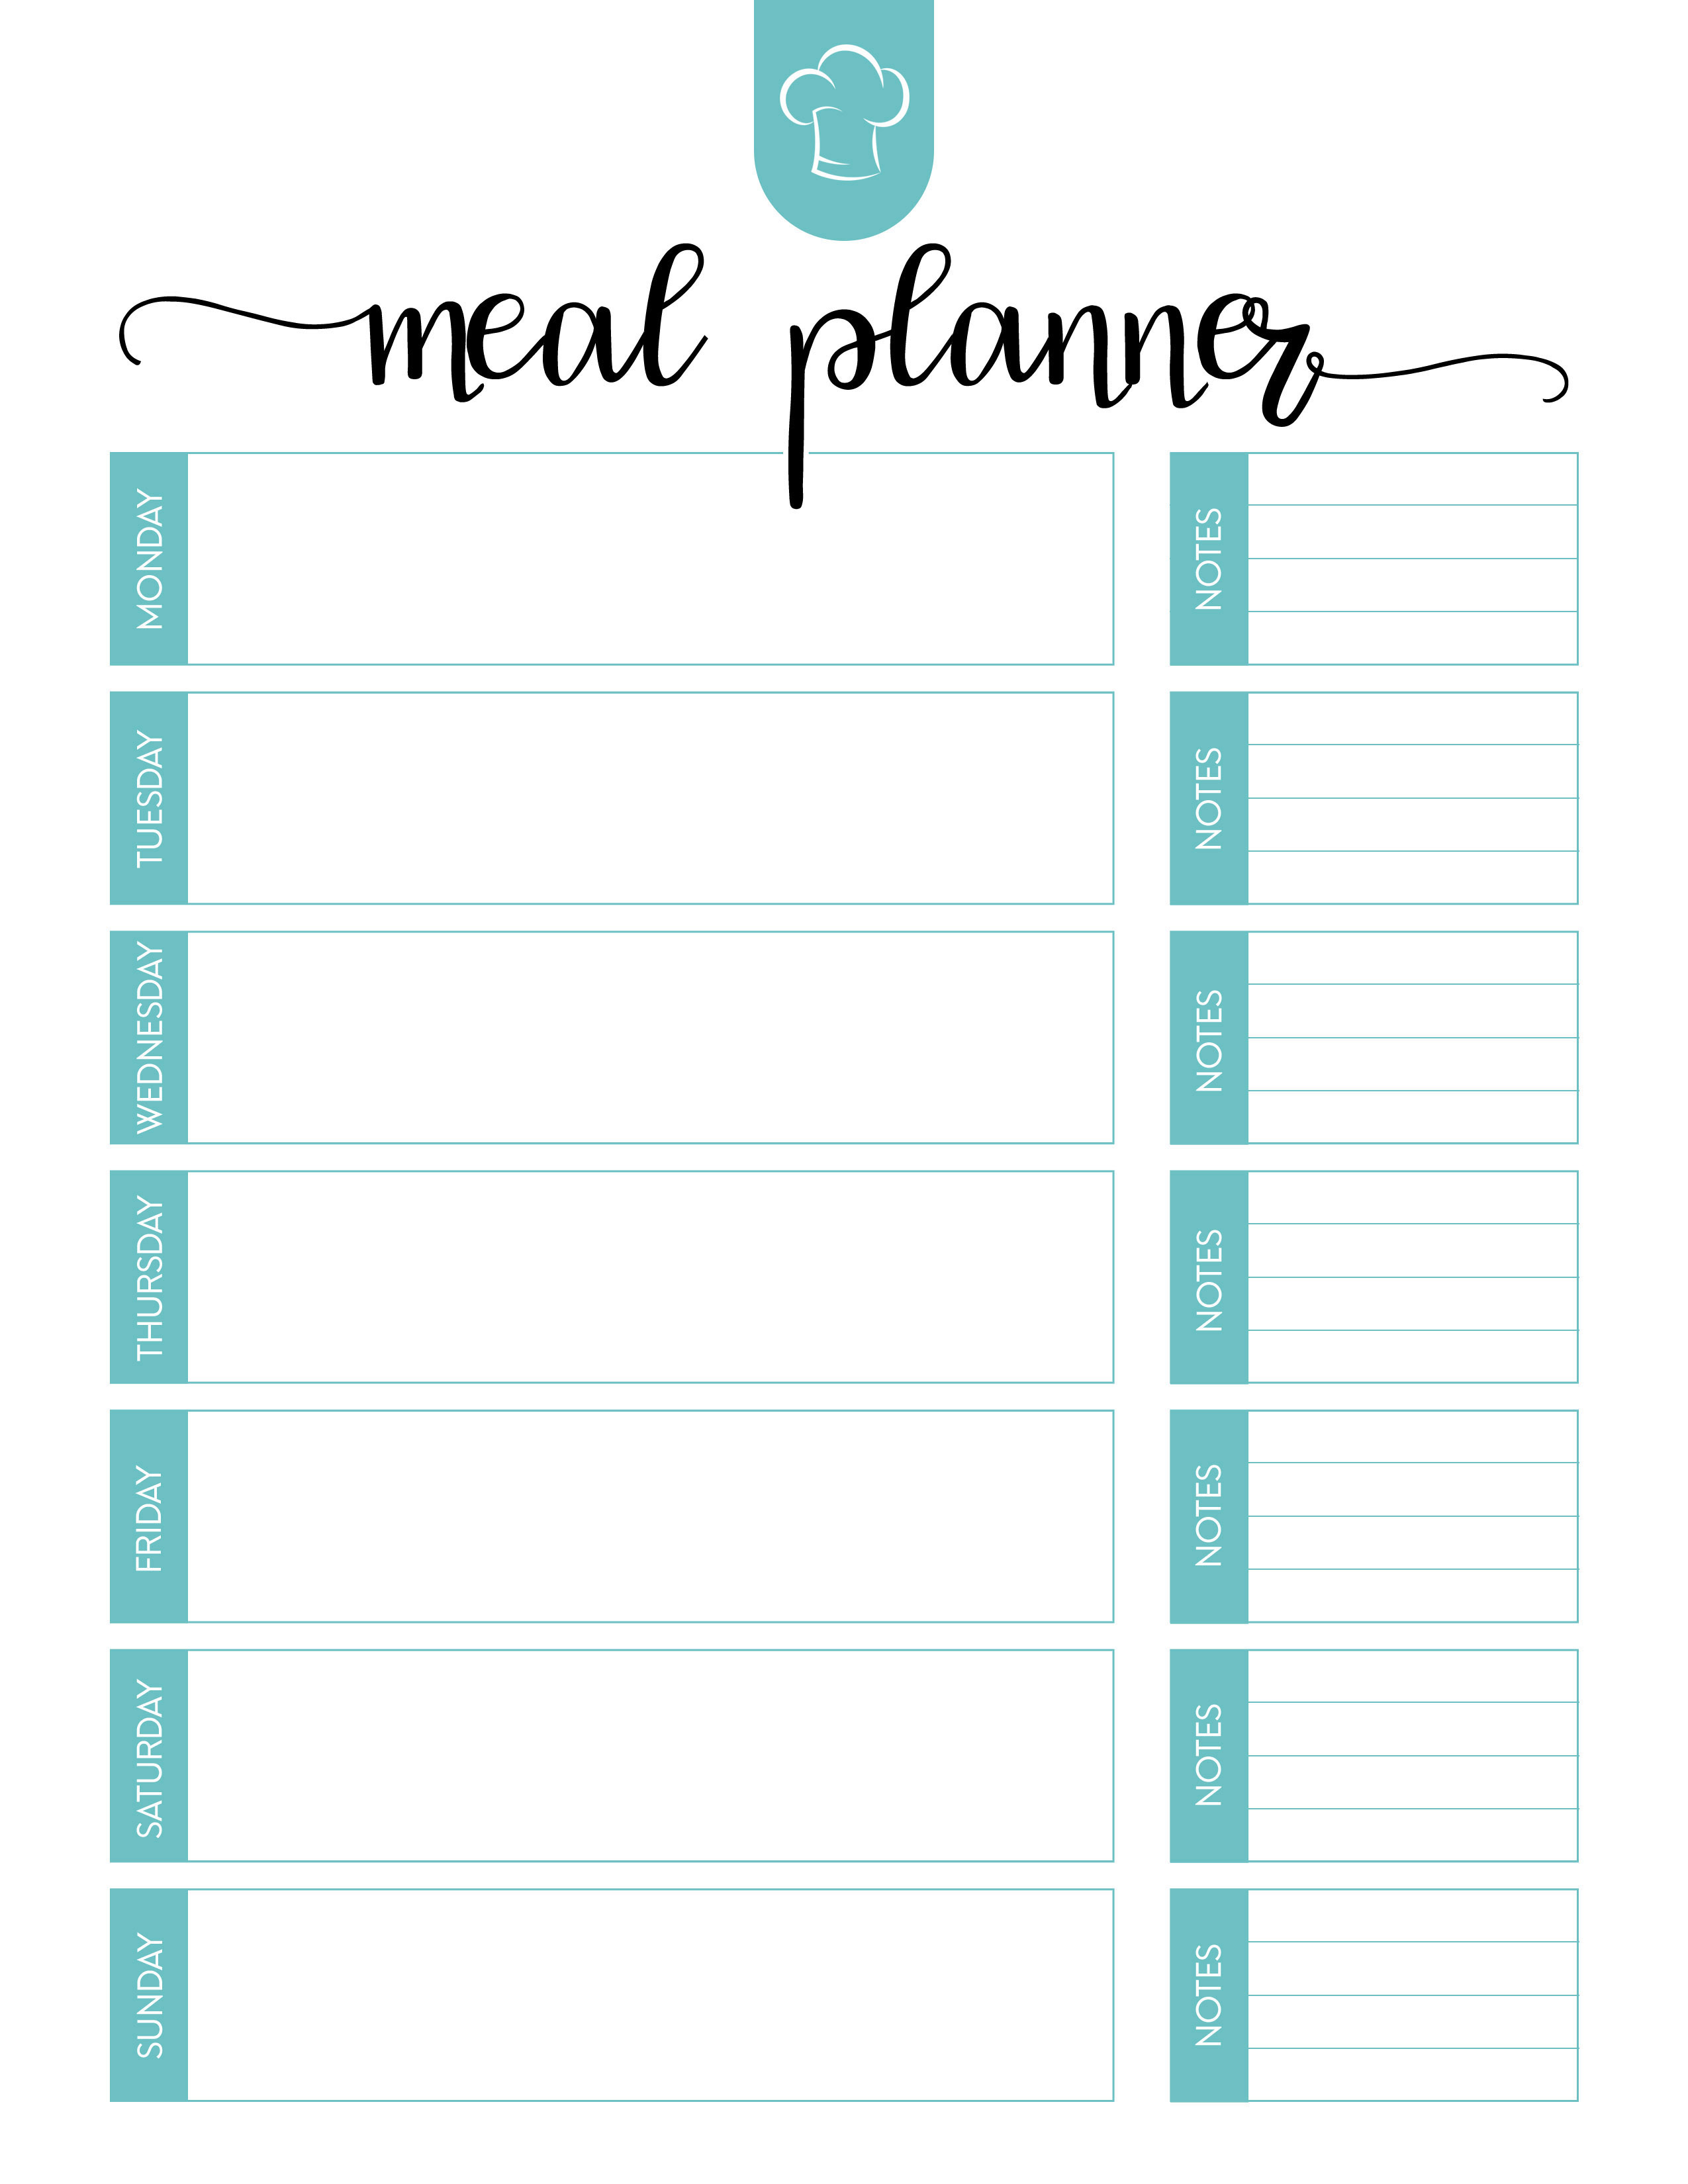 Free Printable Meal Planner Set - The Cottage Market - Free Printable Meal Planner